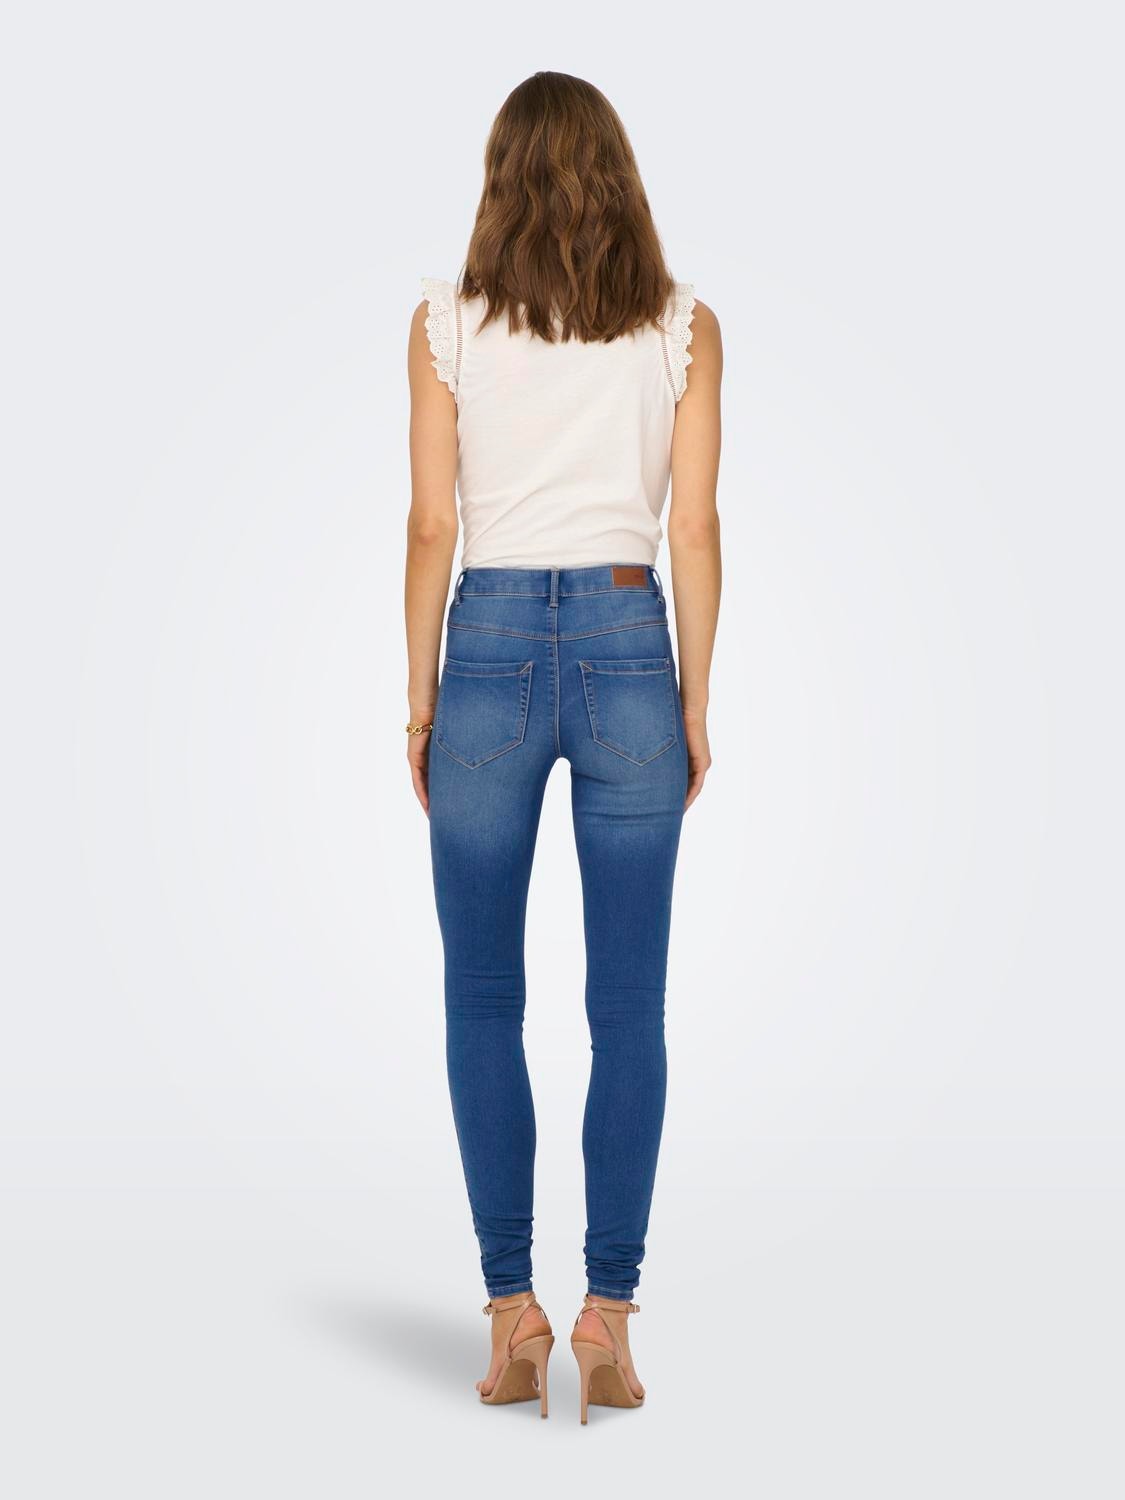 ONLY Skinny Fit Hohe Taille Jeans -Light Medium Blue Denim - 15229831